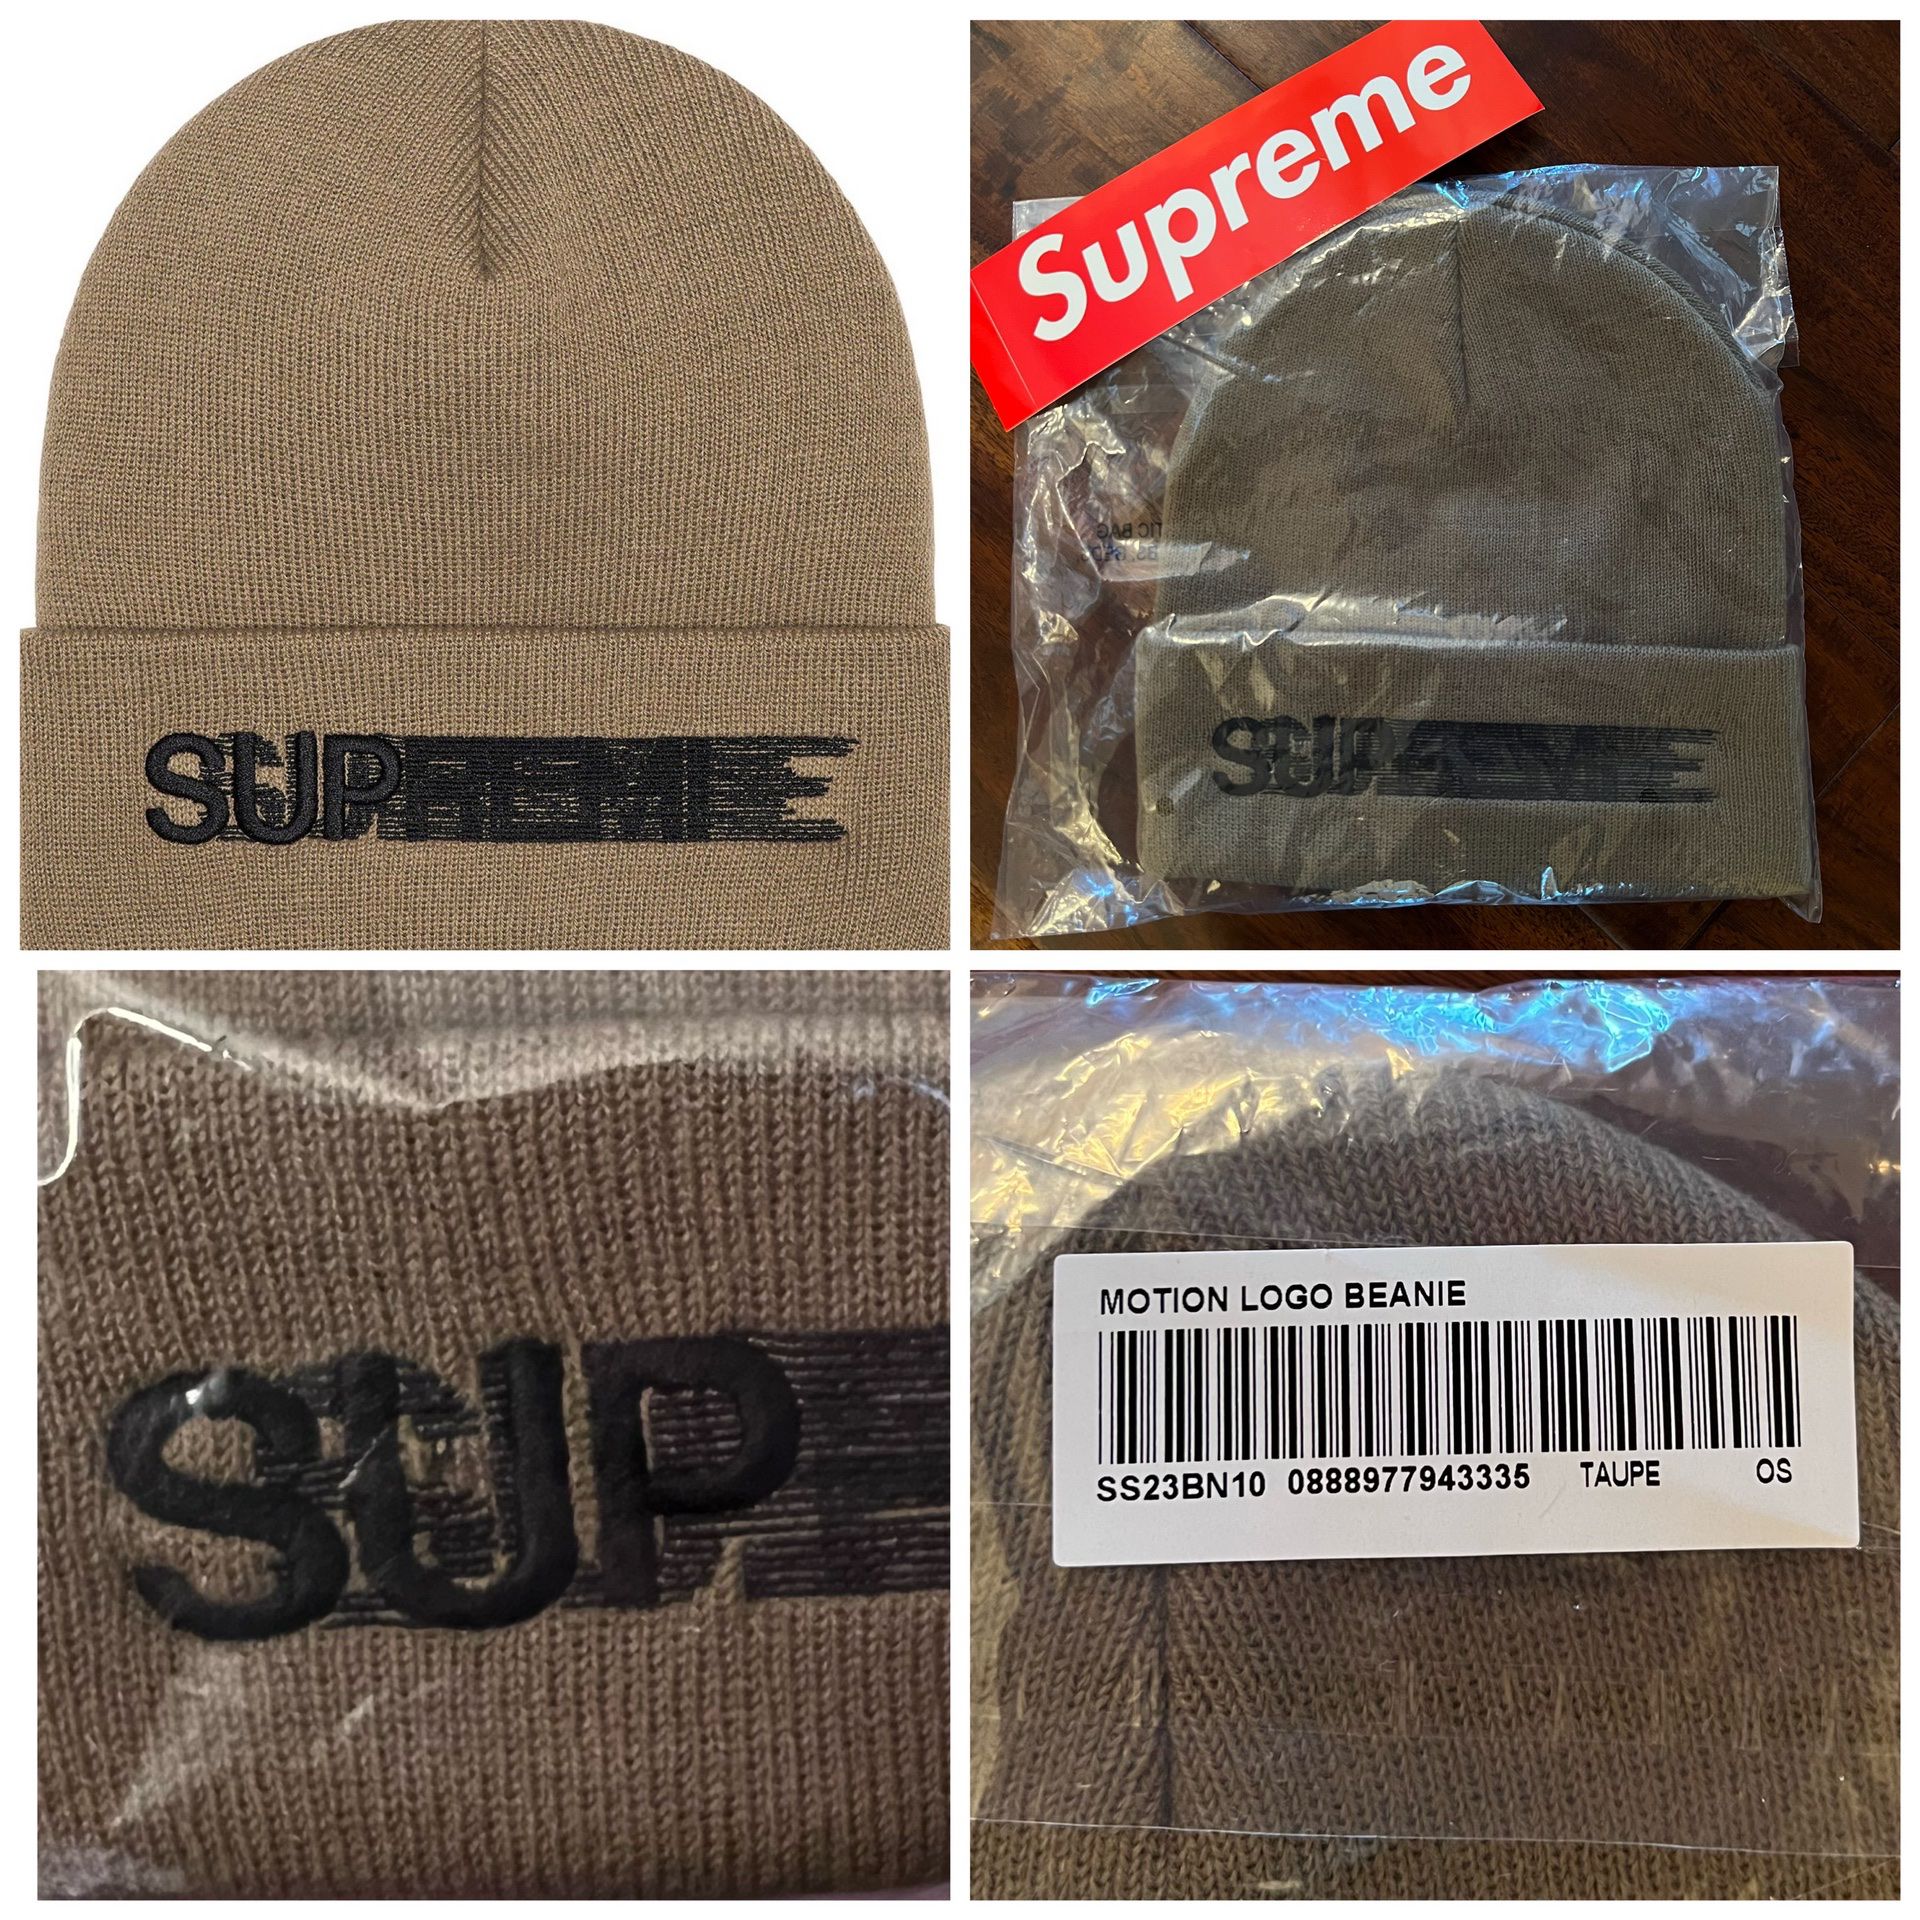 Supreme Motion Logo Beanie (SS23) Taupe Mocha for Sale in